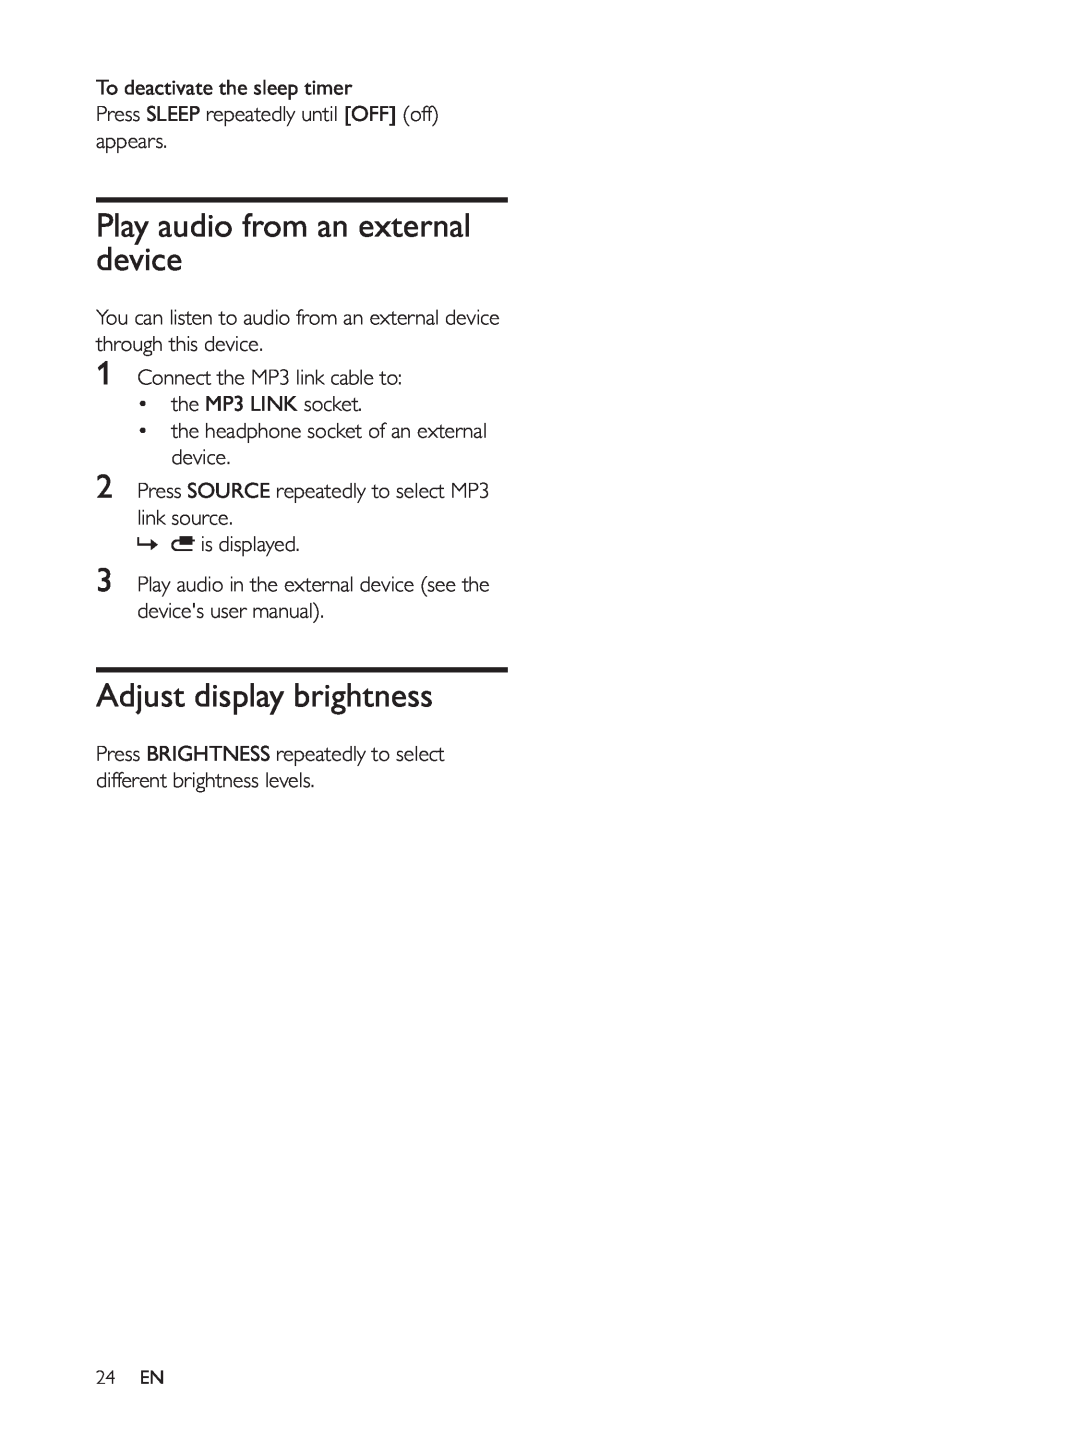 Philips AS140 user manual Play audio from an external device, Adjust display brightness 